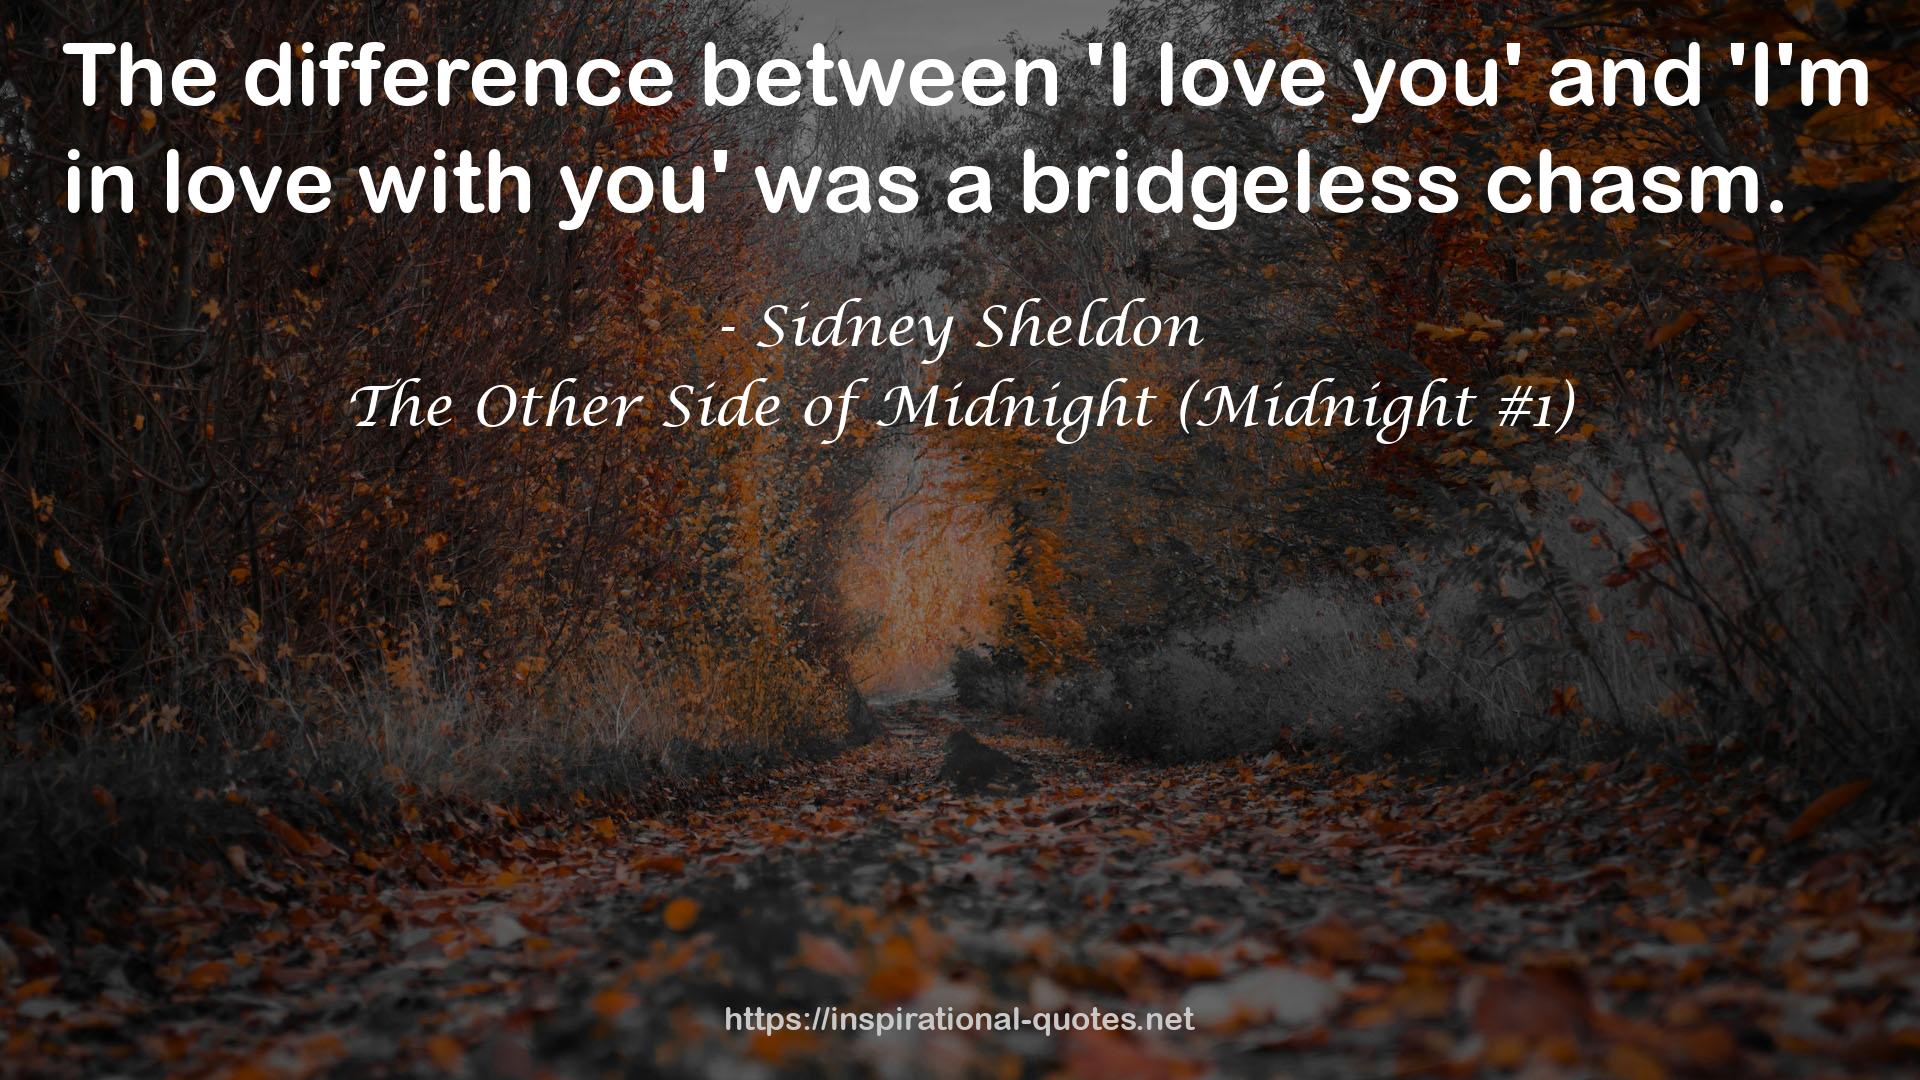 The Other Side of Midnight (Midnight #1) QUOTES